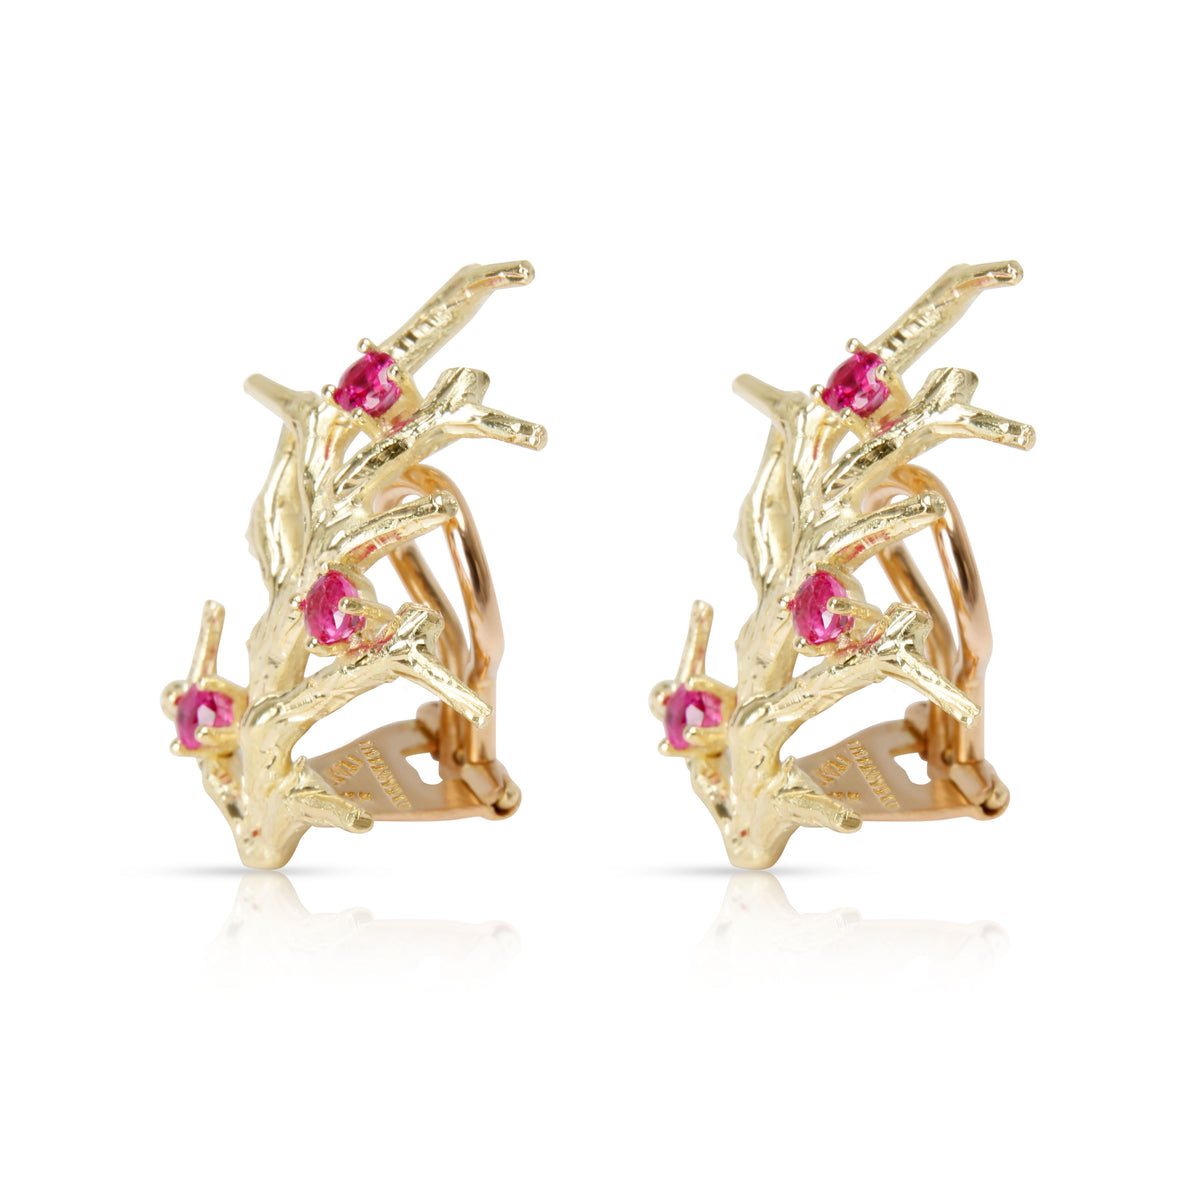 Vintage Tiffany & Co. Coral Pink Sapphire Earrings in 18K Yellow Gold